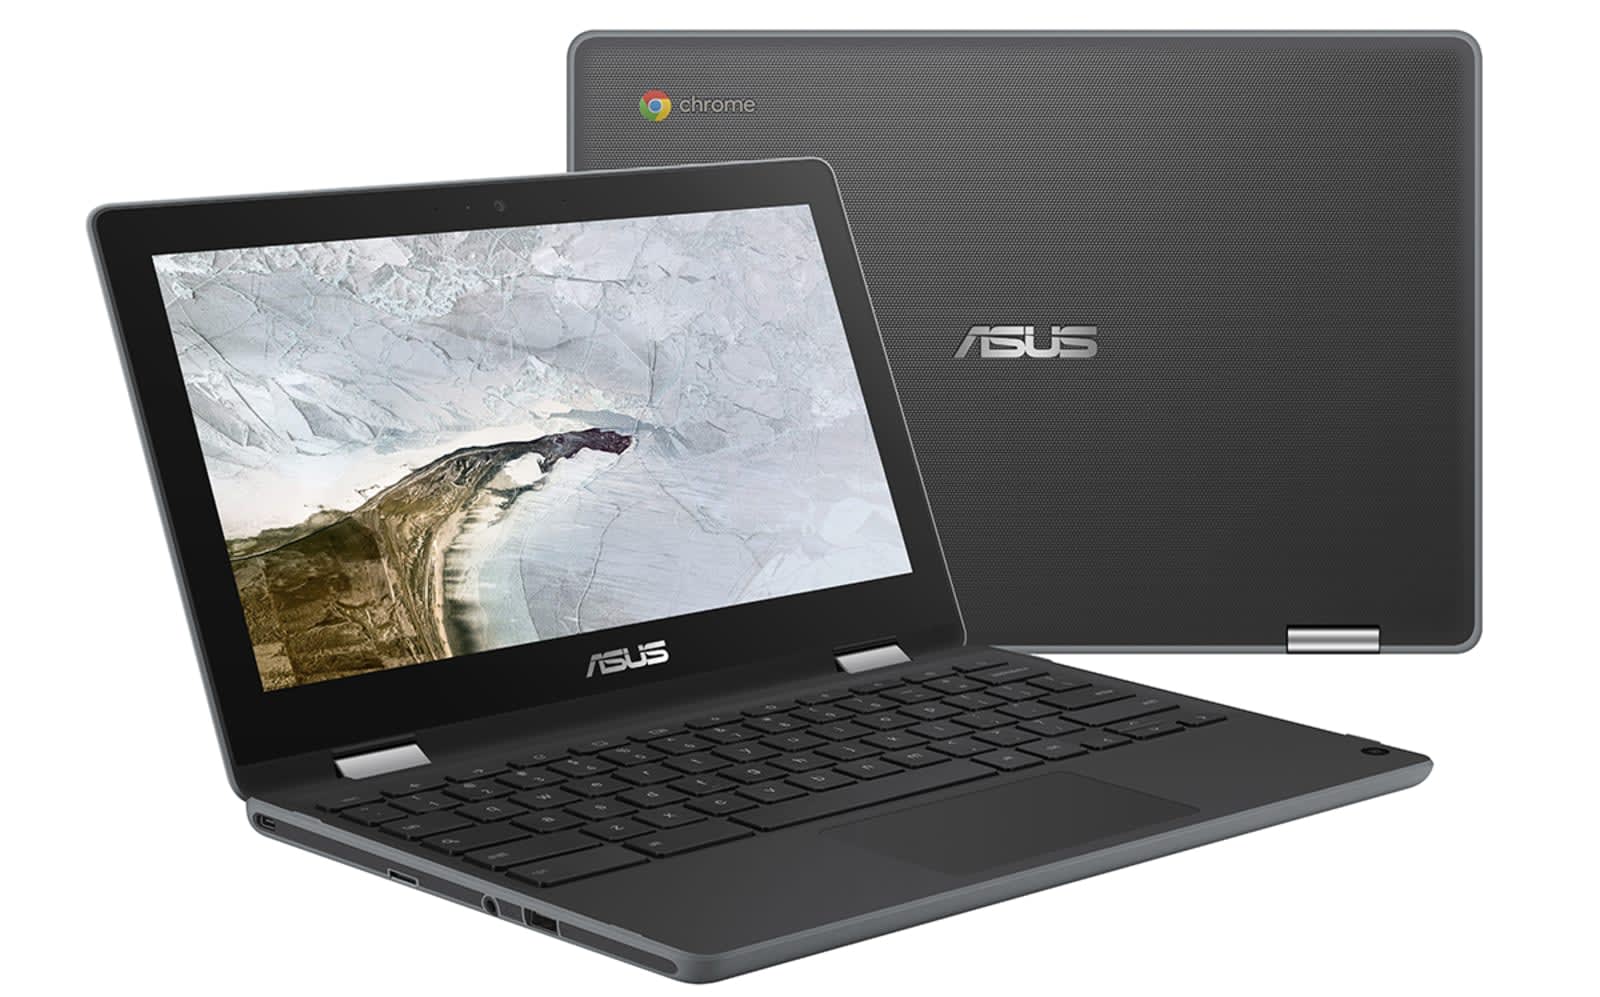 ASUS unveils its first Chrome OS tablet